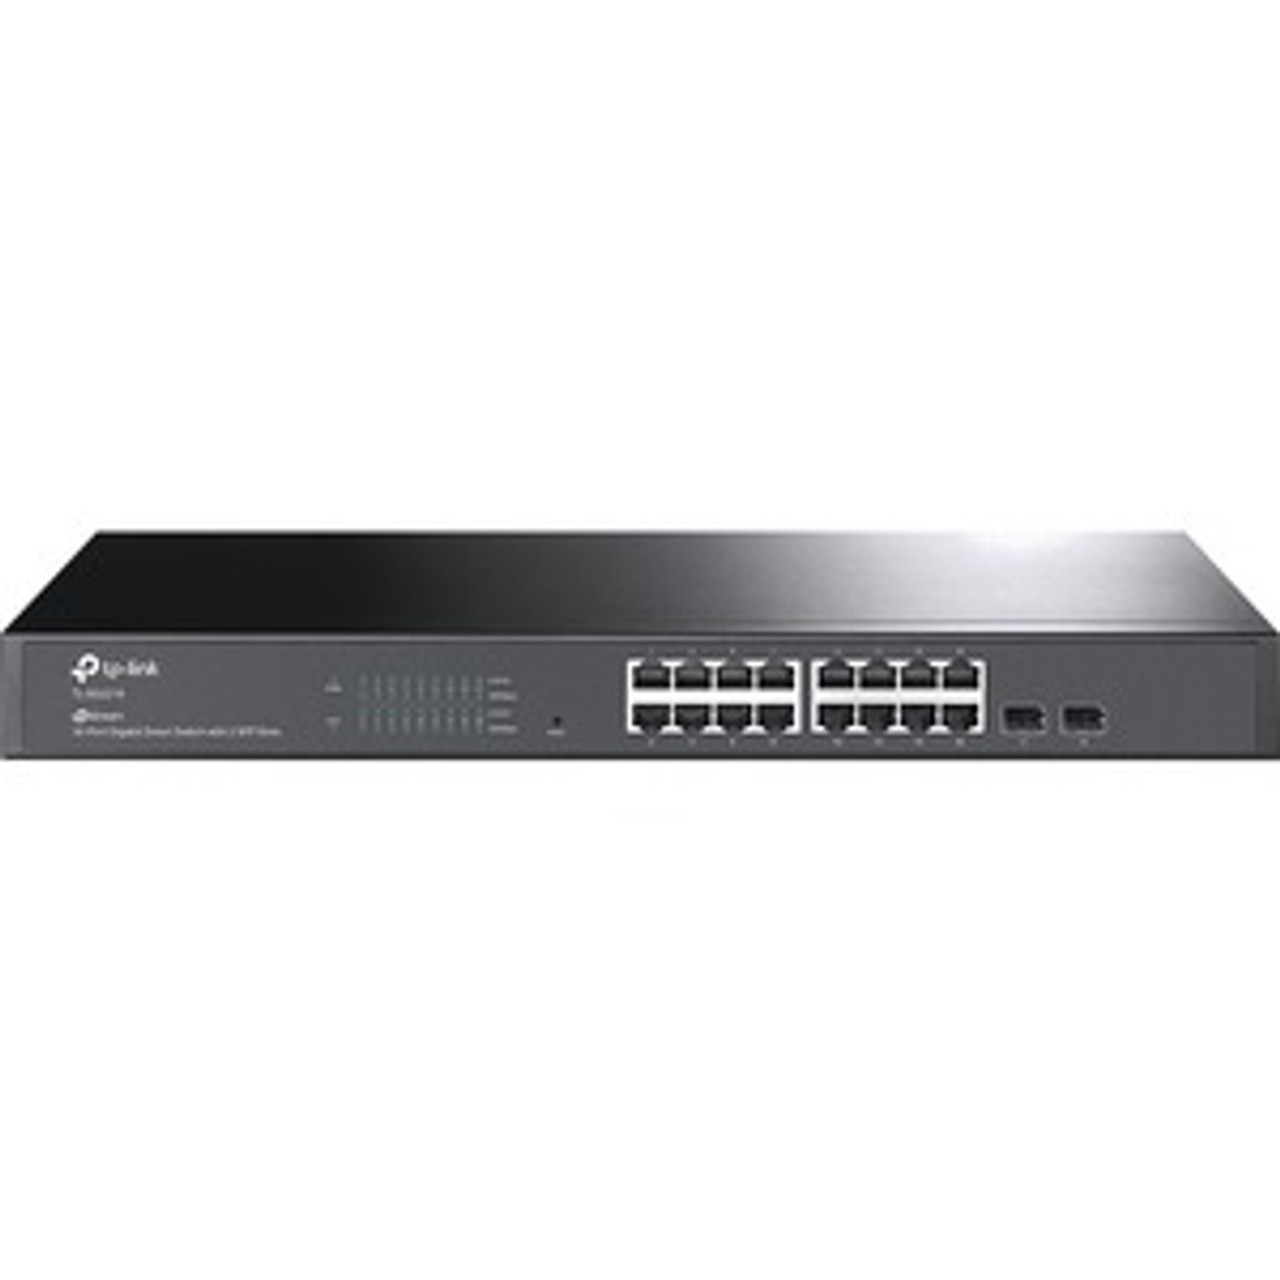 TL-SG2218 TP-Link JetStream TL-SG2218 Ethernet Switch - 16 Ports - Manageable - 3 Layer Supported - Modular - 2 SFP Slots - 12.30 W Power Consumption -